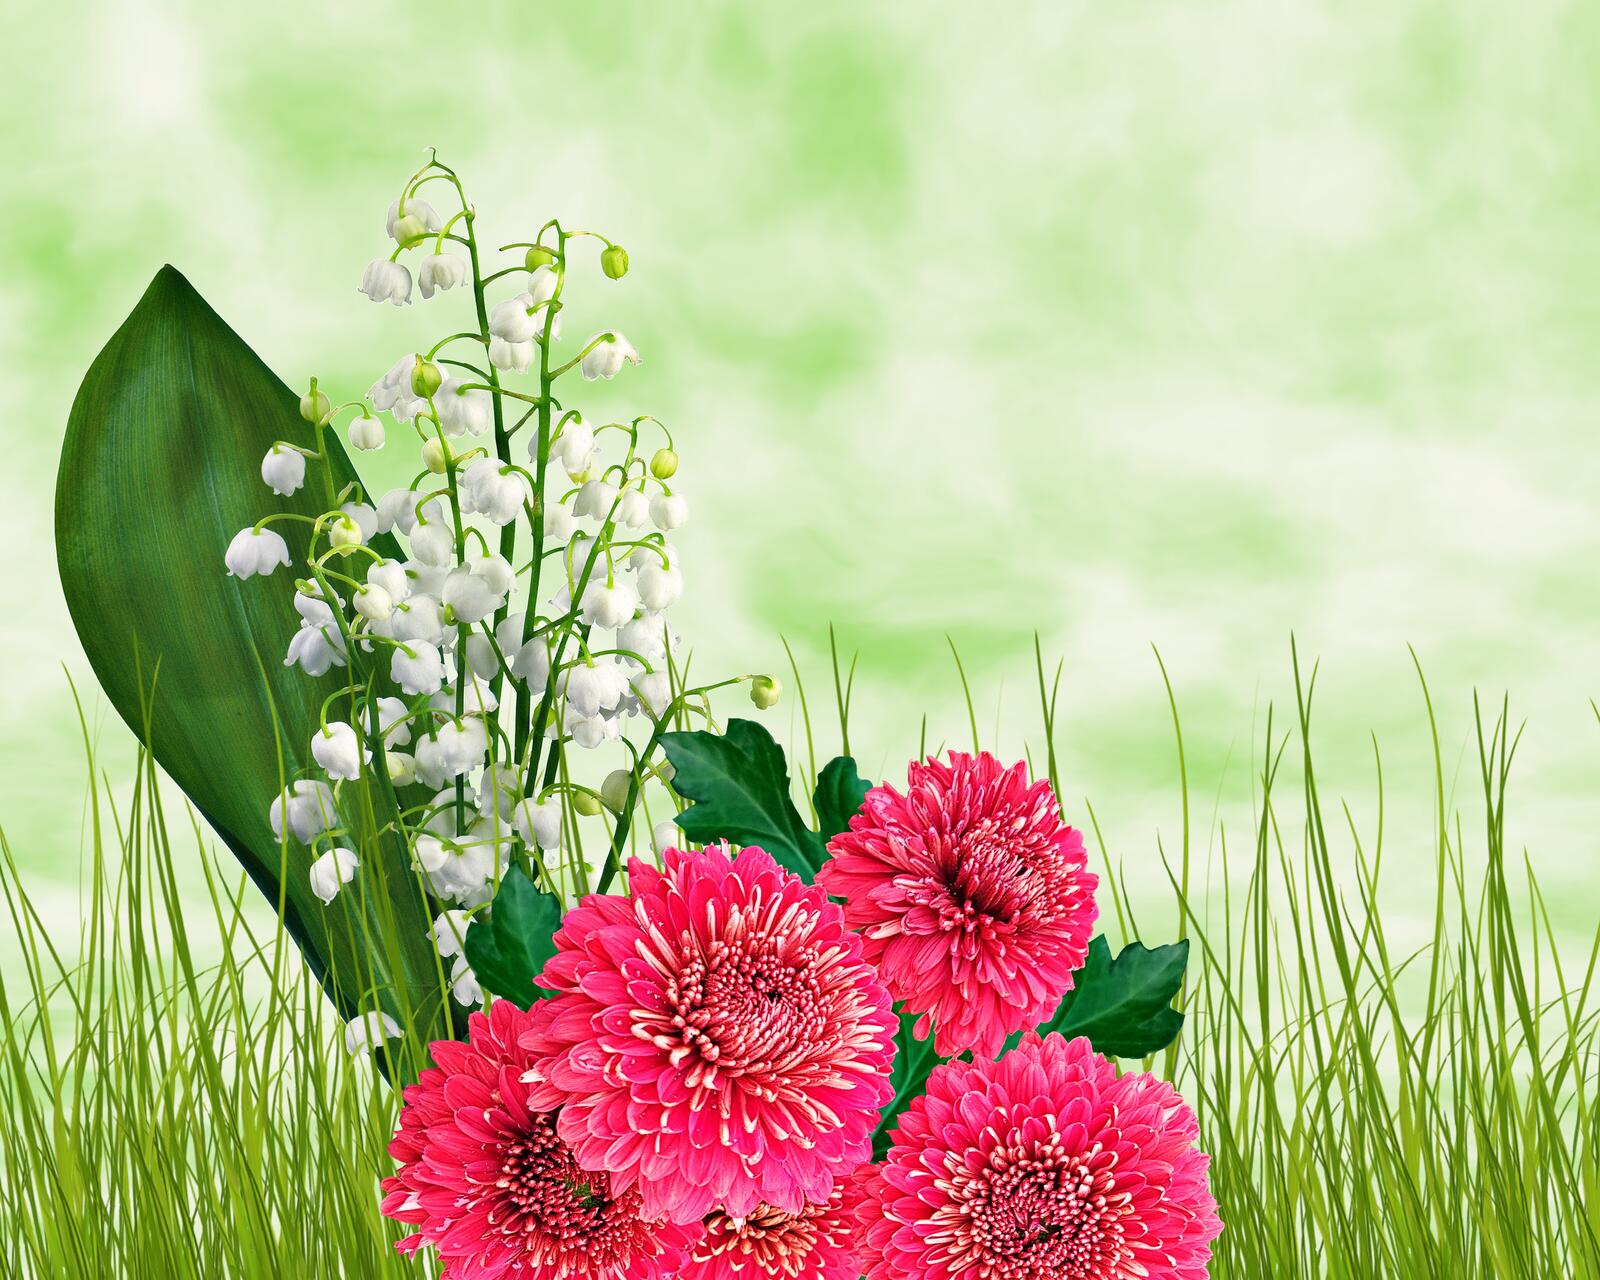 Wallpapers lilies of the valley dahlias grass on the desktop